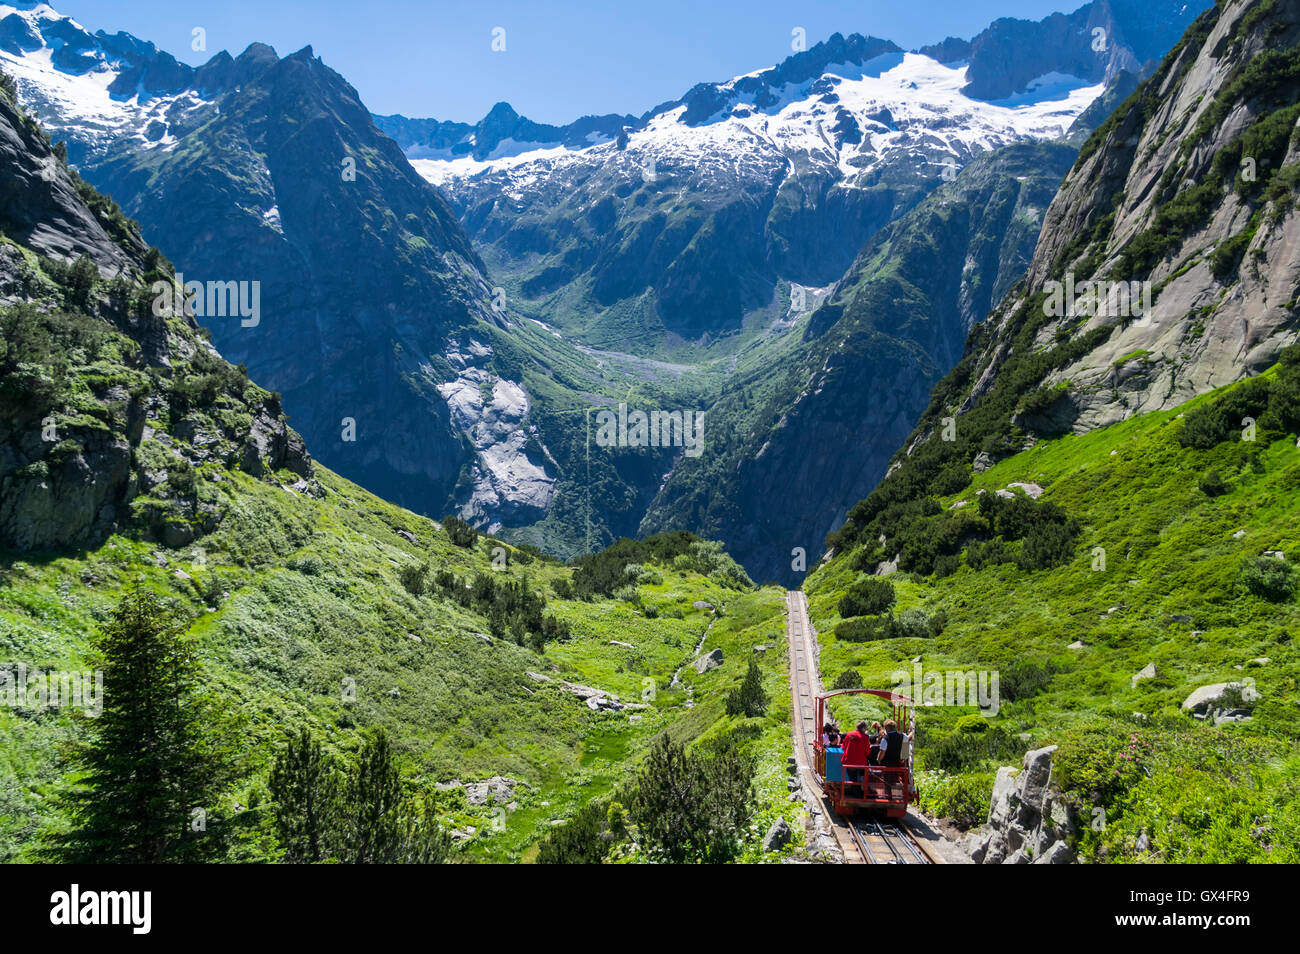 Gelmerbahn funicular in the Swiss Alps. One of the steepest funiculars in the world with a maximum gradient of 106%. Stock Photo